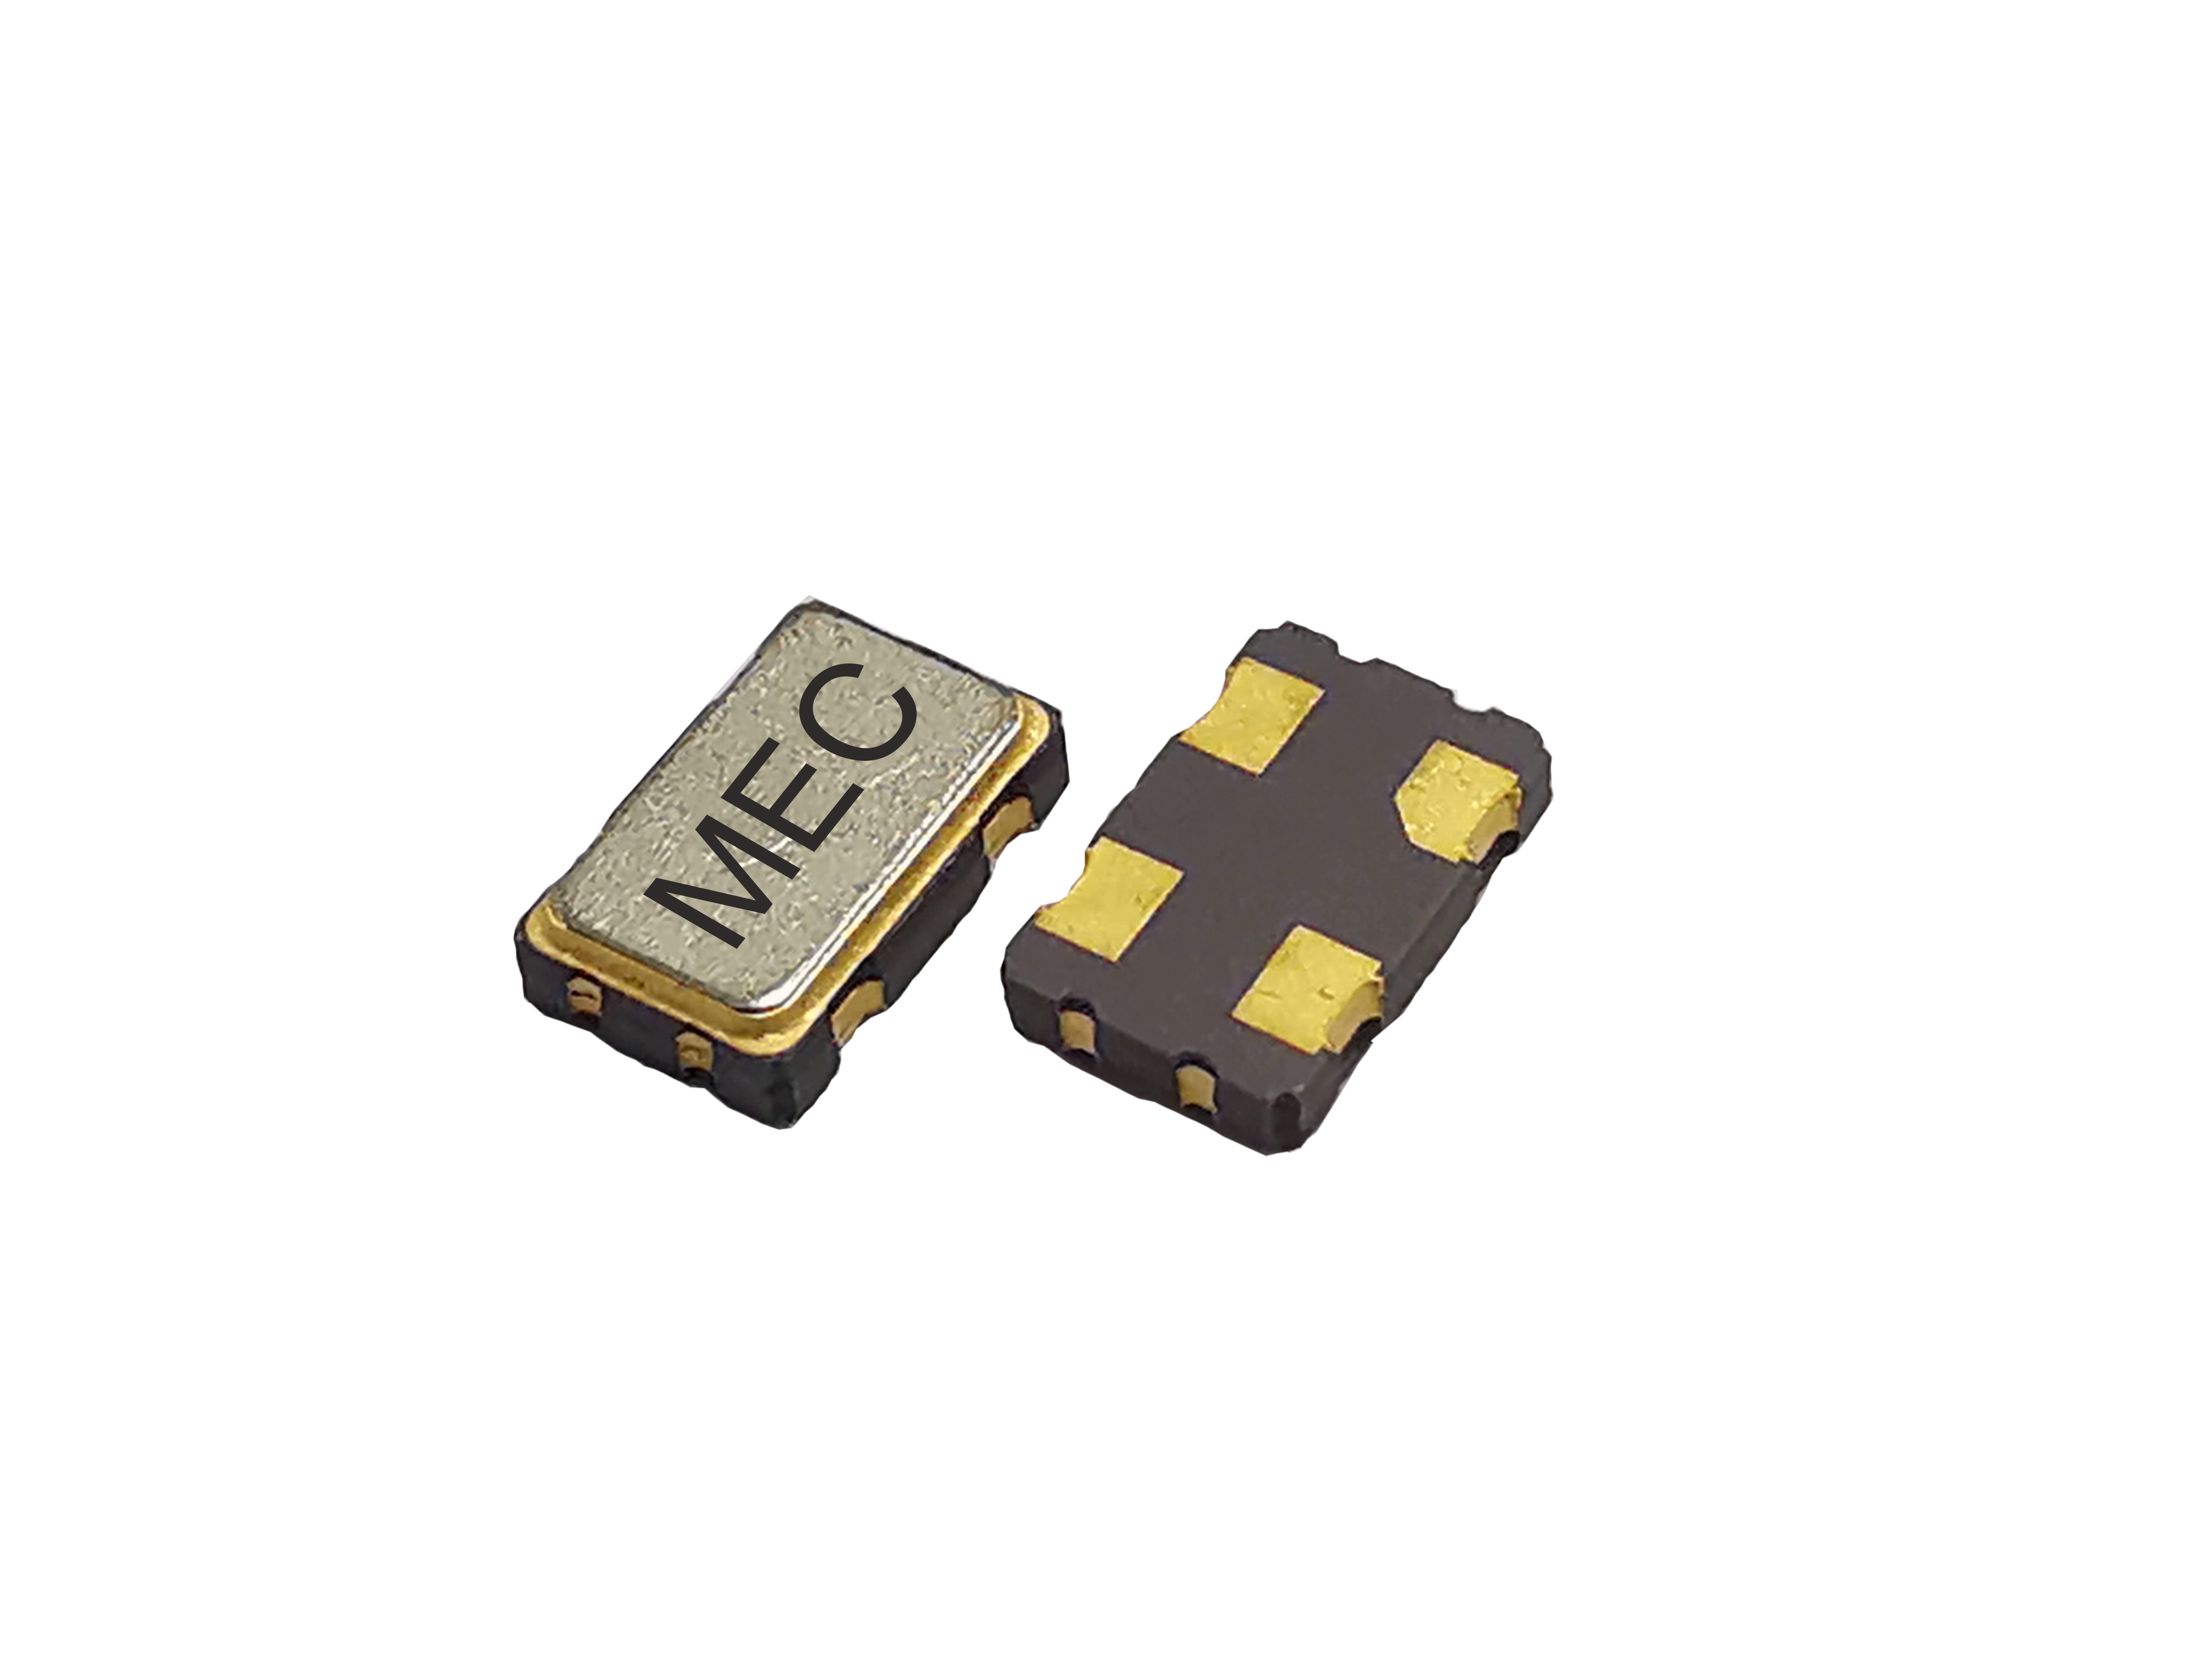 HC53 5032 1.8V Frequency Swithable CMOS SMD Crystal Oscillator